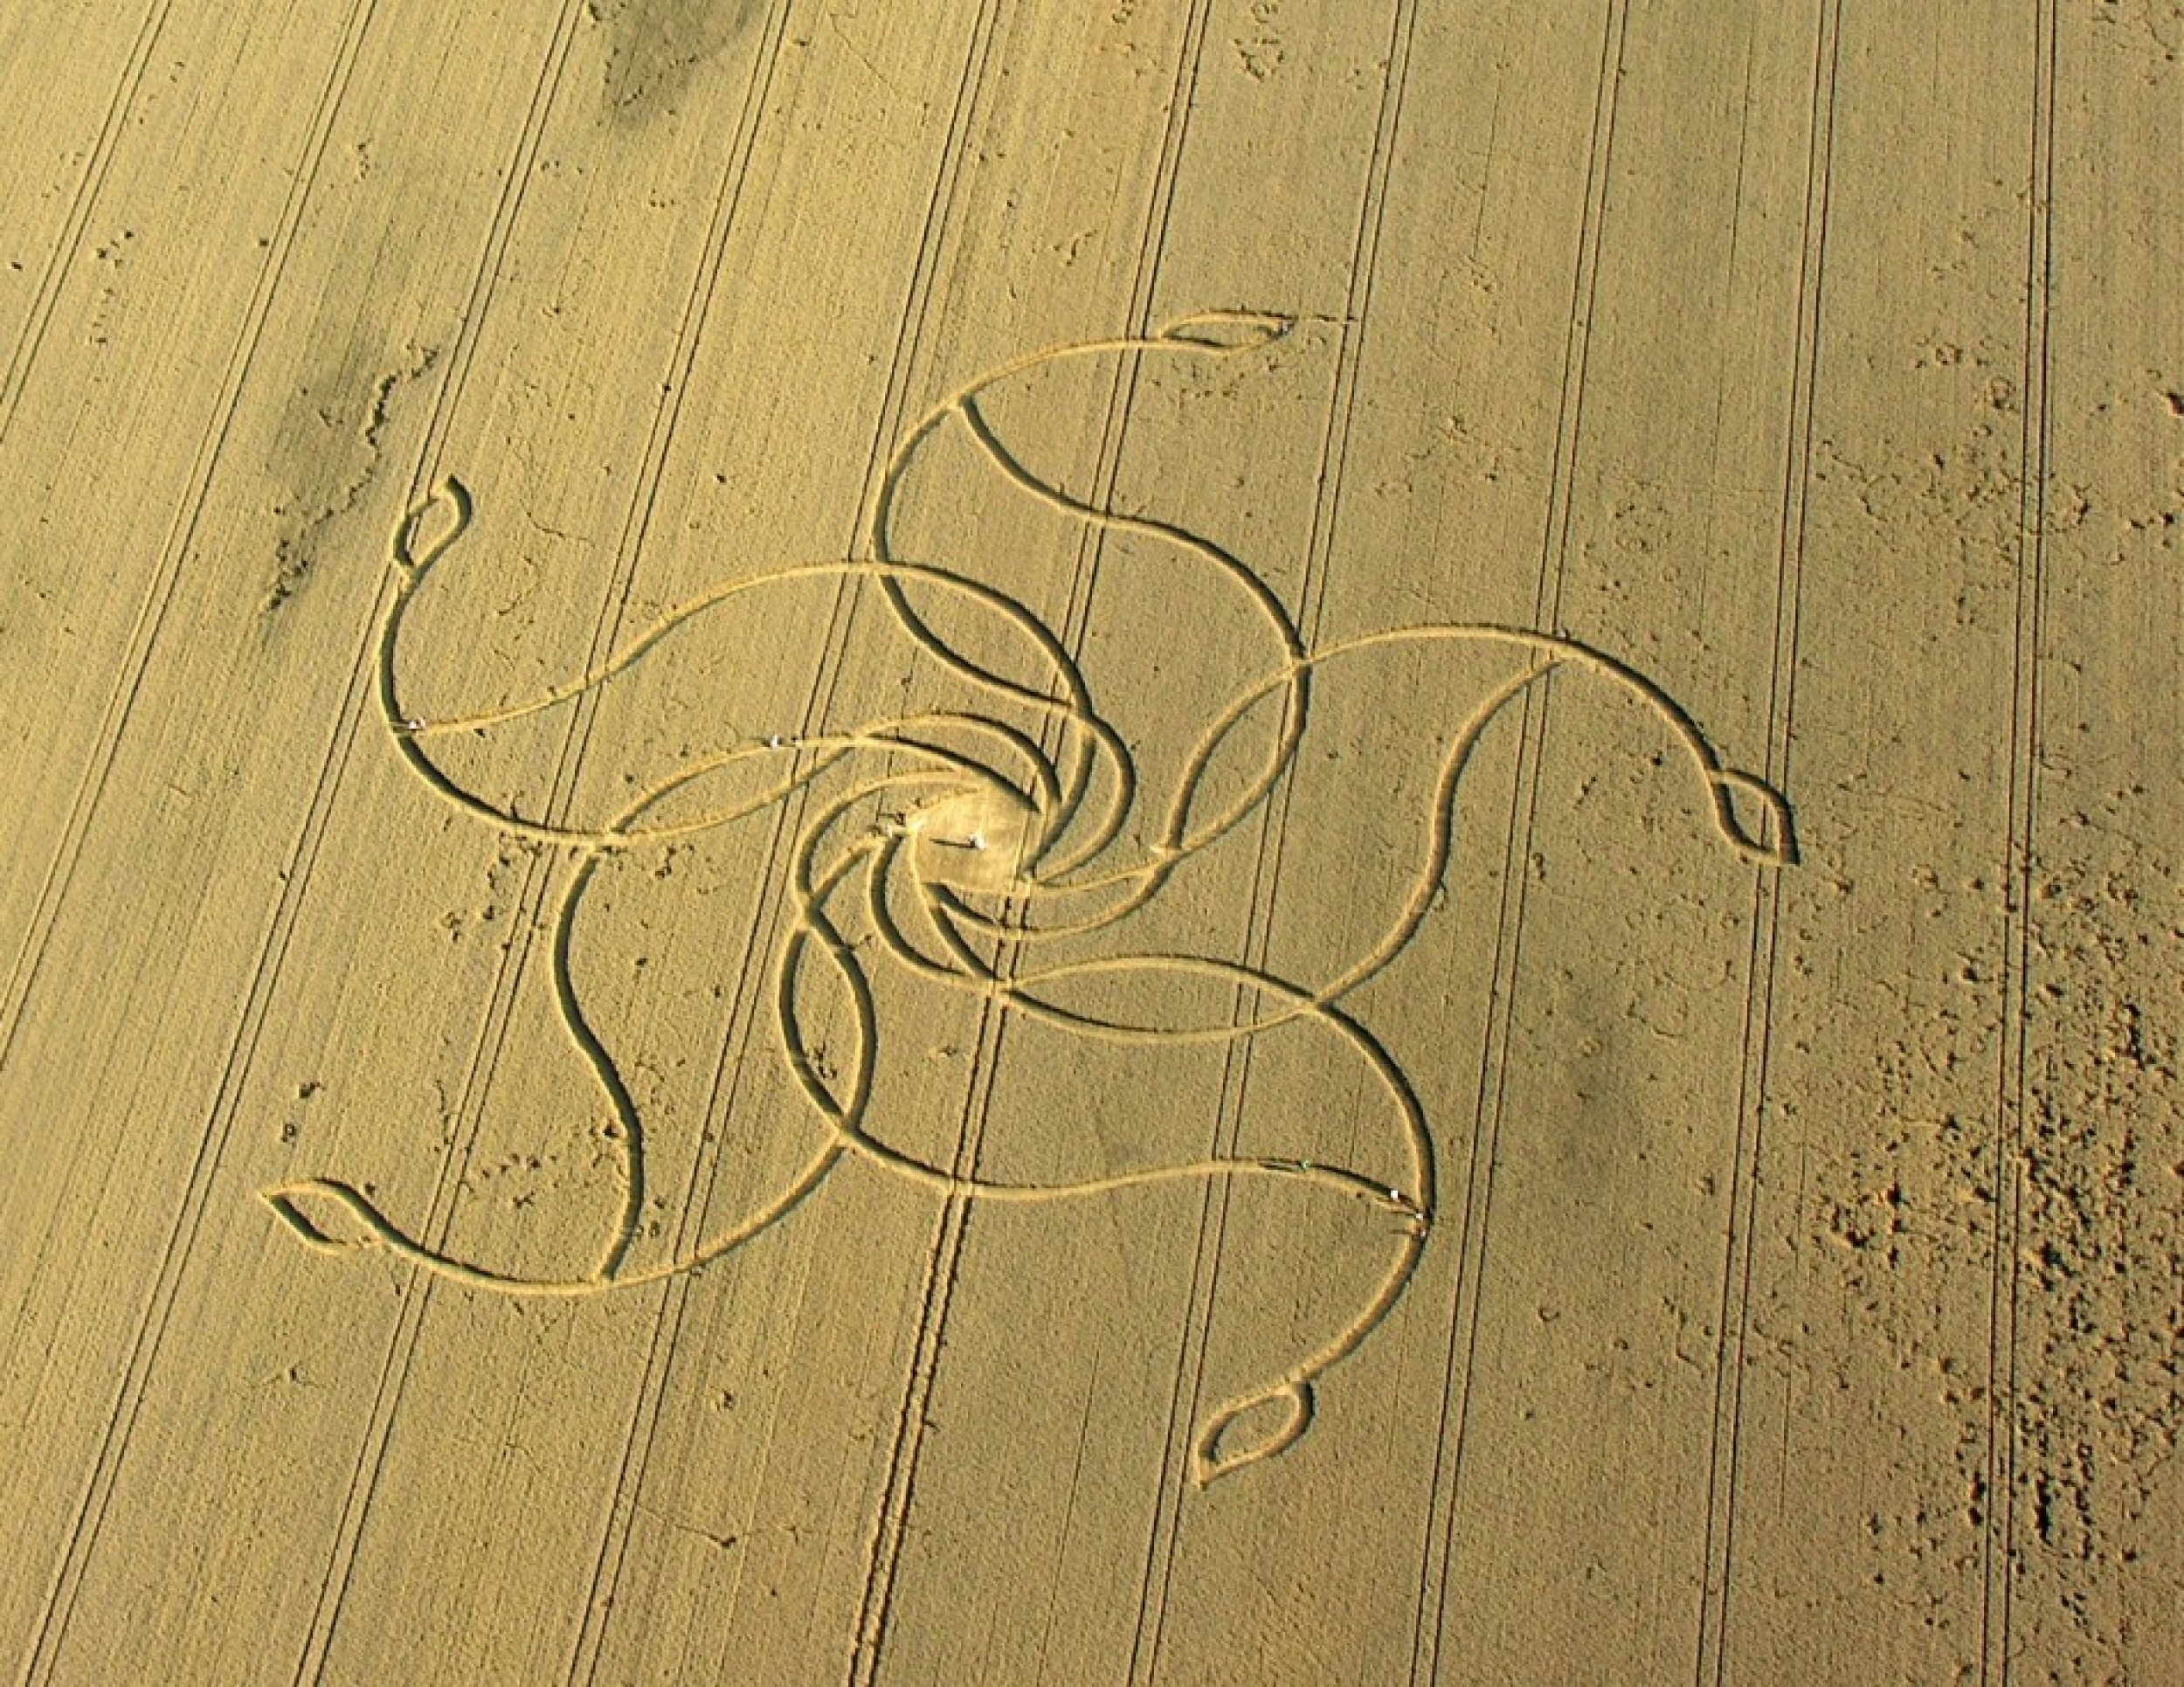 Aliens or Terrestrial Hoaxers Crop Circles Created Using GPS, Lasers and Microwaves.